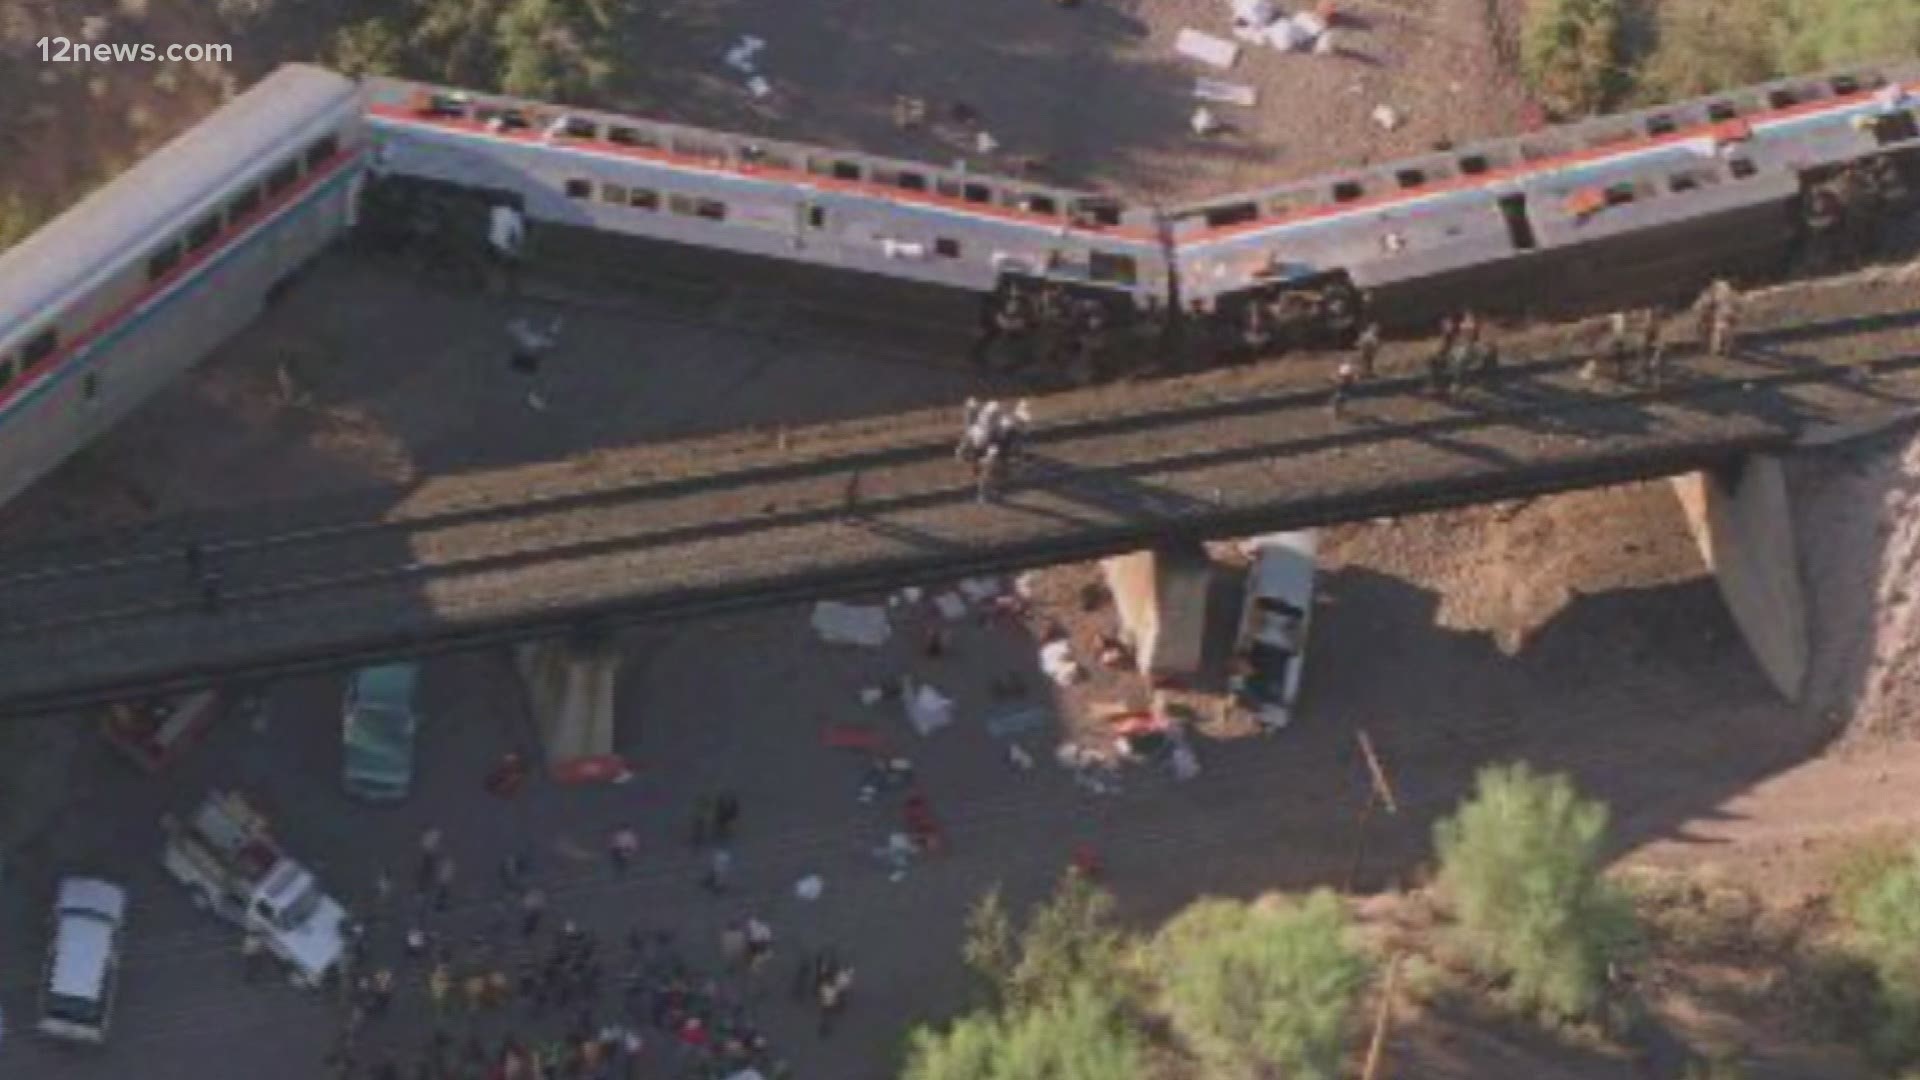 The Sunset Limited train derailment happened 25 years ago about 70 miles southwest of Phoenix. Someone plotted the attack and the FBI is still looking for suspects.